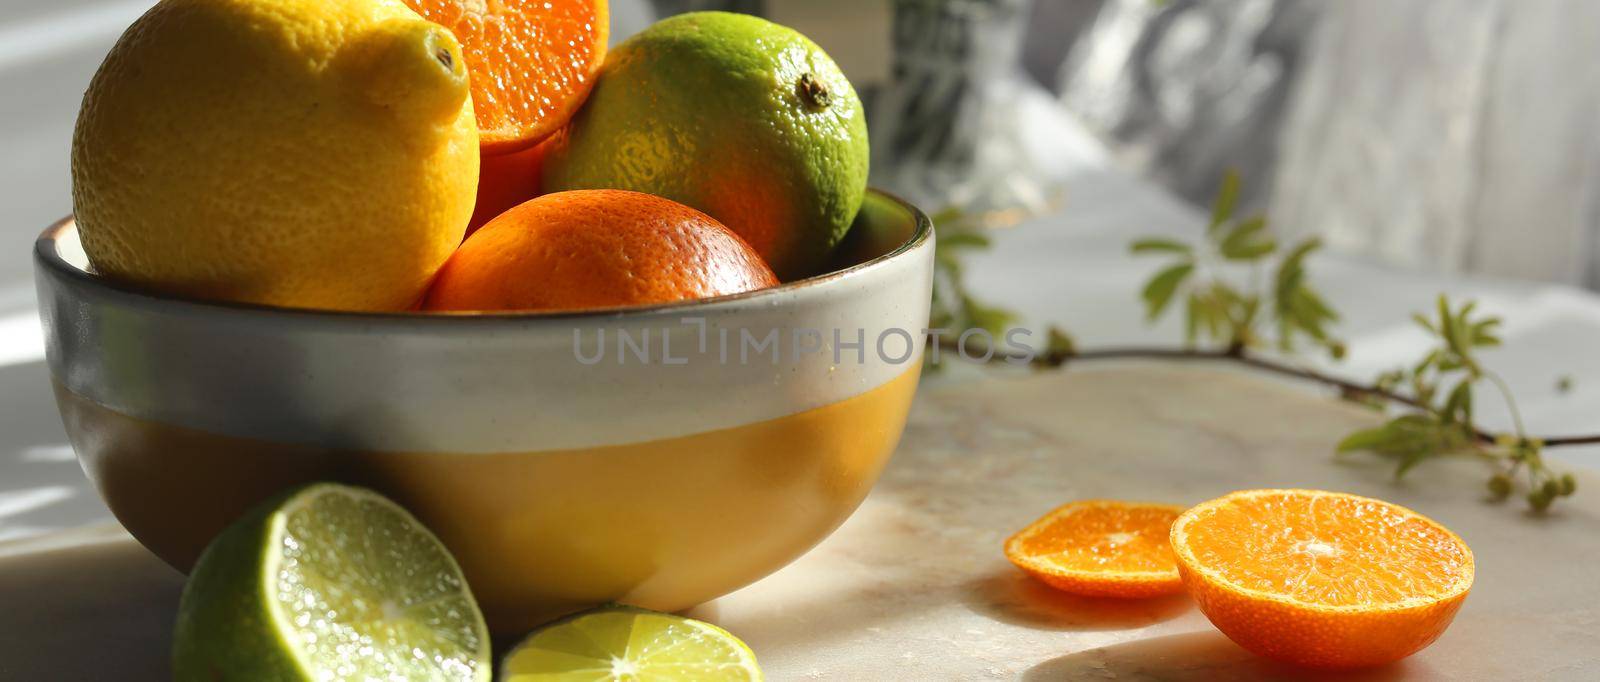 rustic kitchen with citrus by NelliPolk